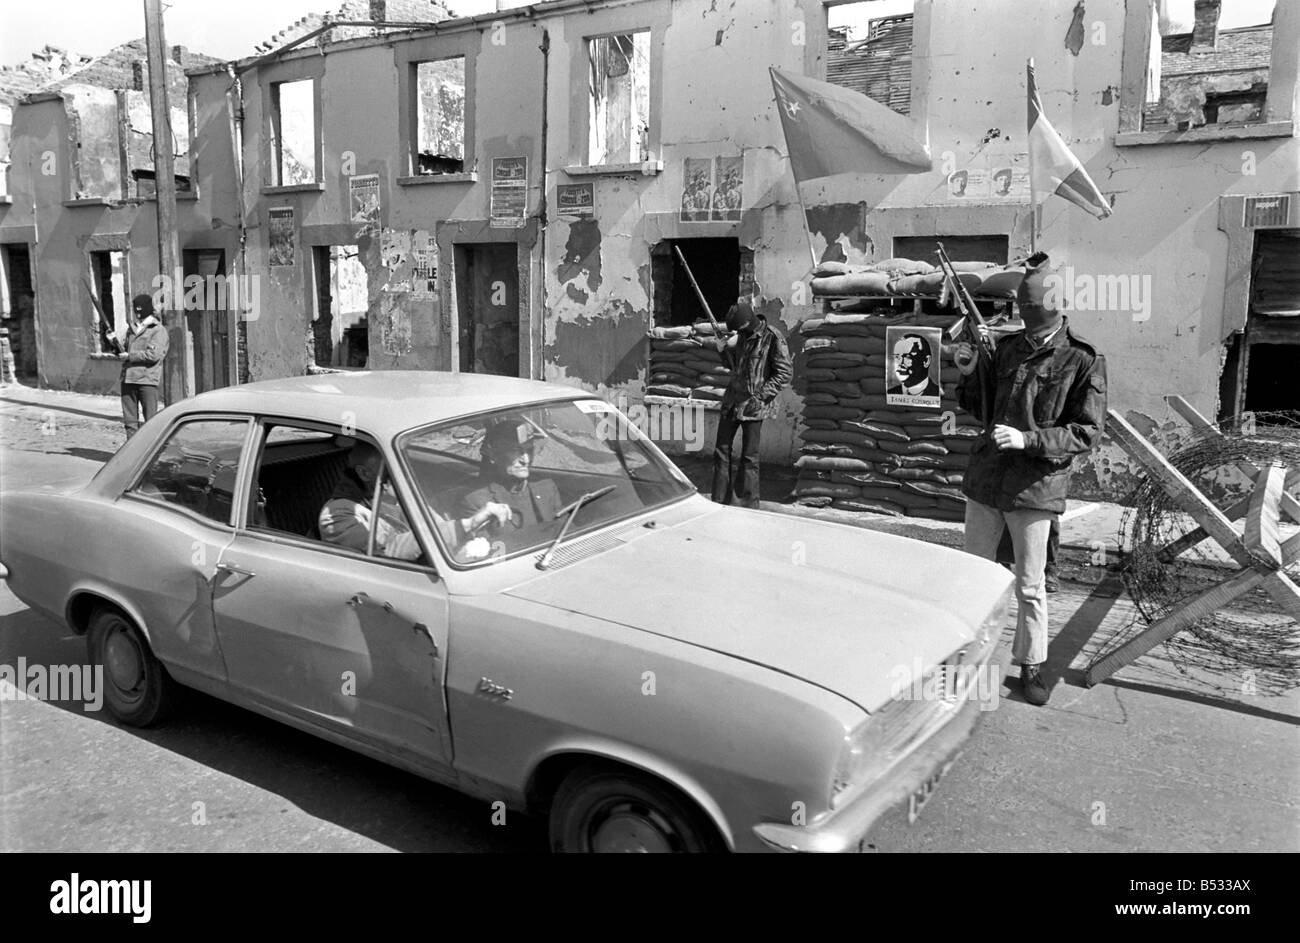 Northern Ireland April 1972. Members of the official IRA seen manning a barricade in the Bogside. April 1972 72-4762-001 Stock Photo